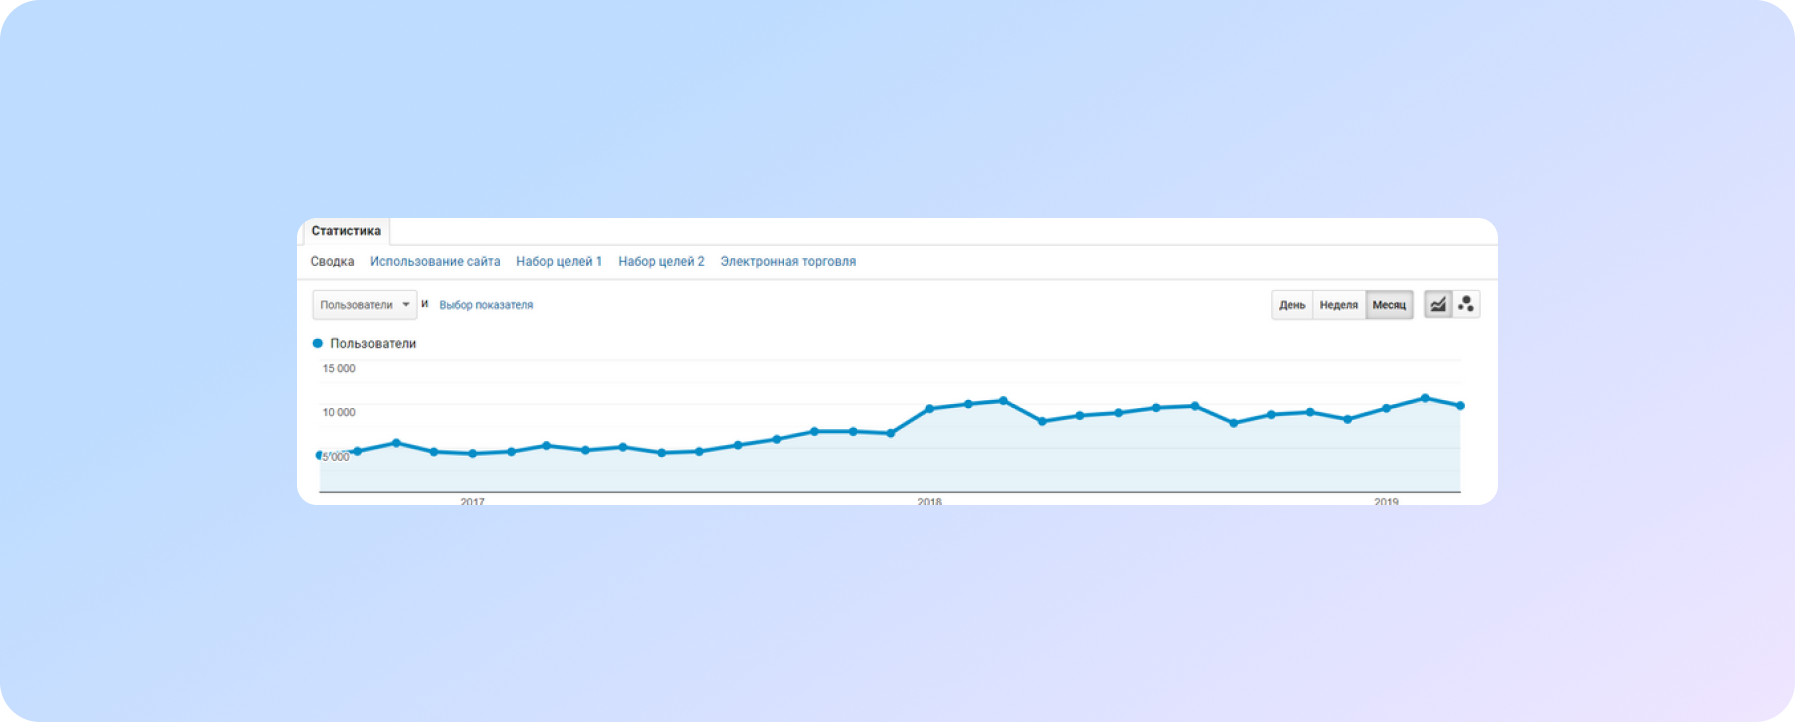 Traffic growth after collecting a complete semantic core for the service site